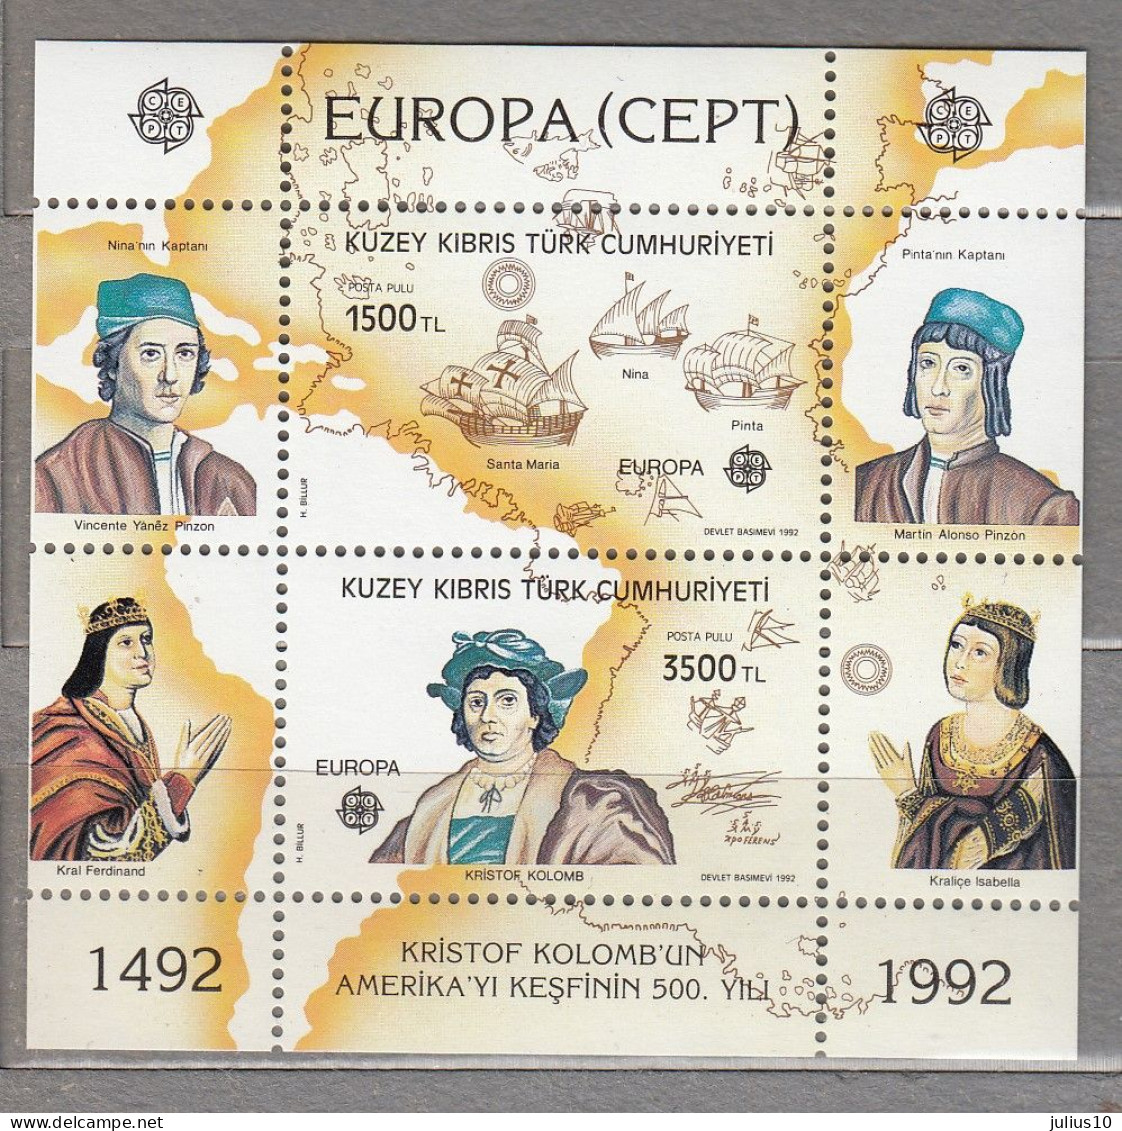 EUROPA CEPT 1992 Cyprus Tr. C.Colombo 500th Discovery Of America MNH(**) Mi Bl 10 #33920 - 1992